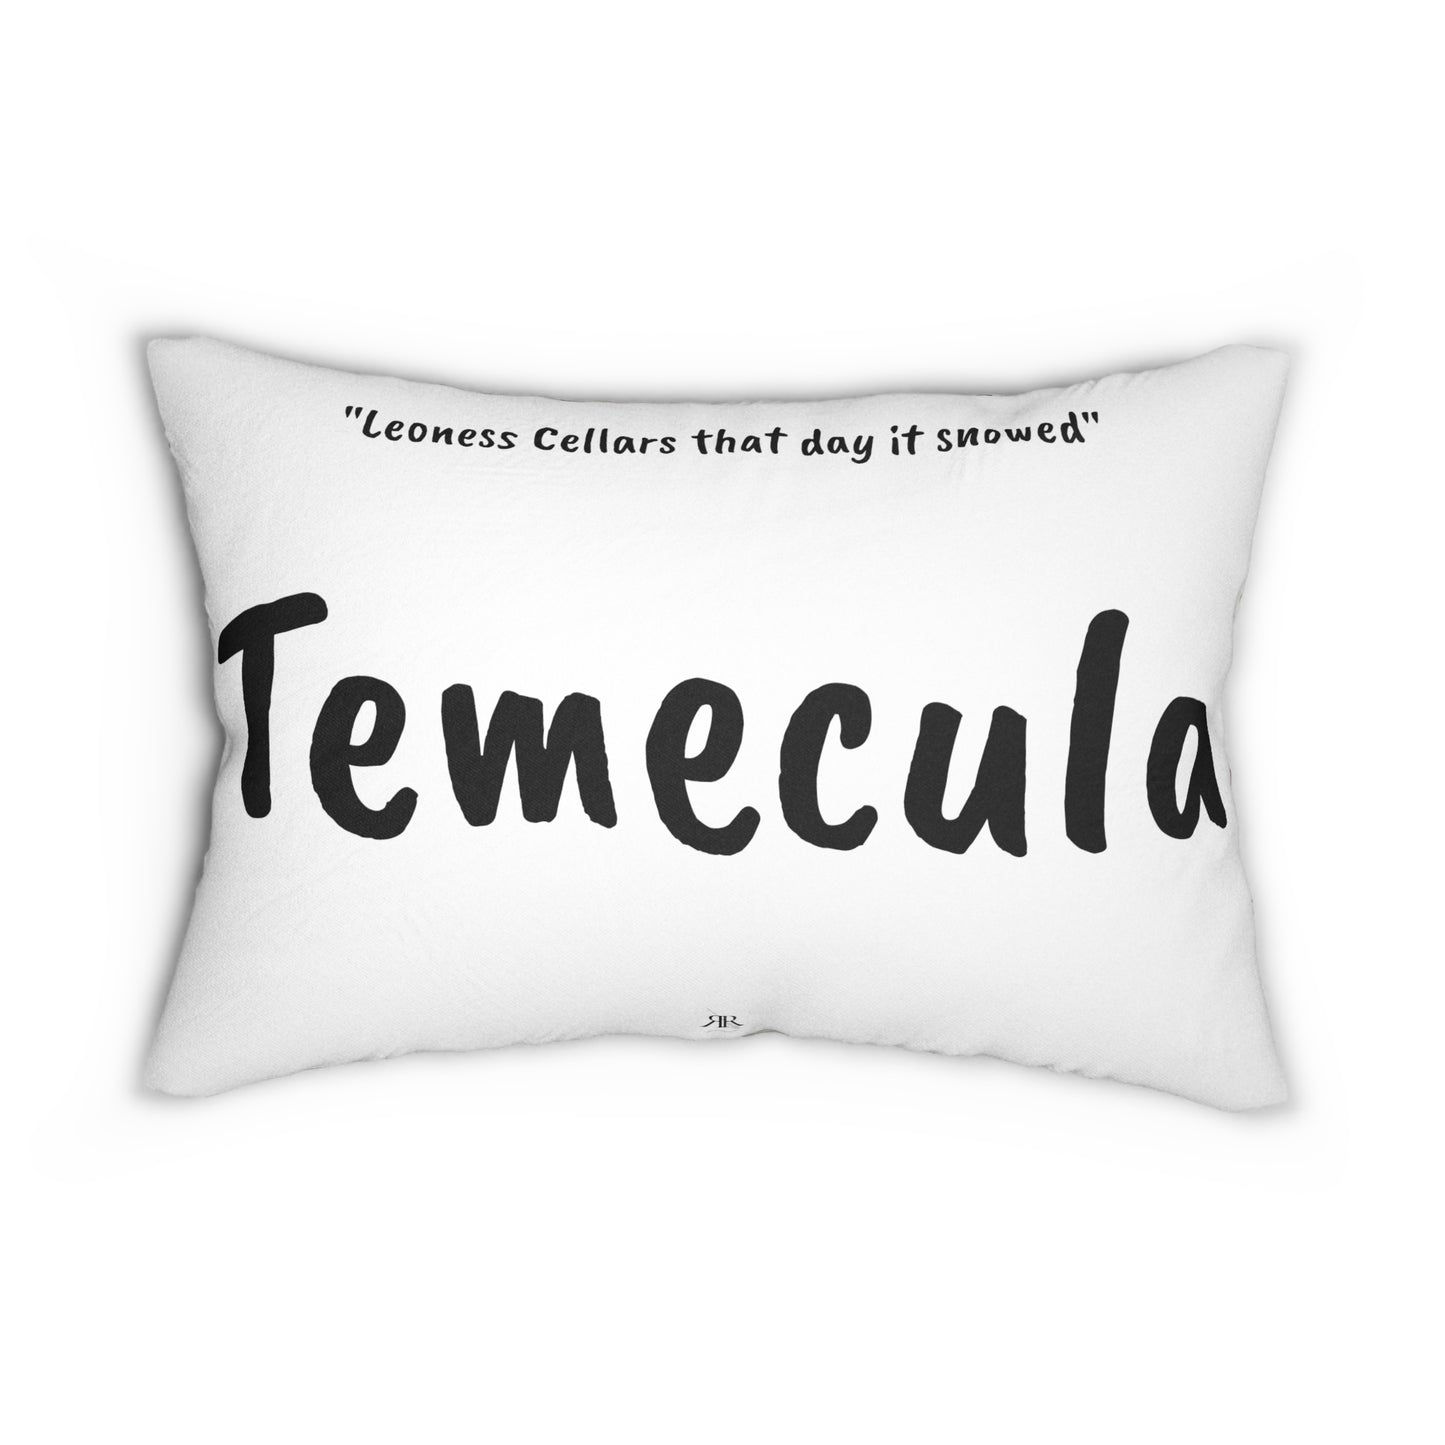 Temecula Lumbar Pillow featuring "Leoness that day it snowed" painting and "Temecula"